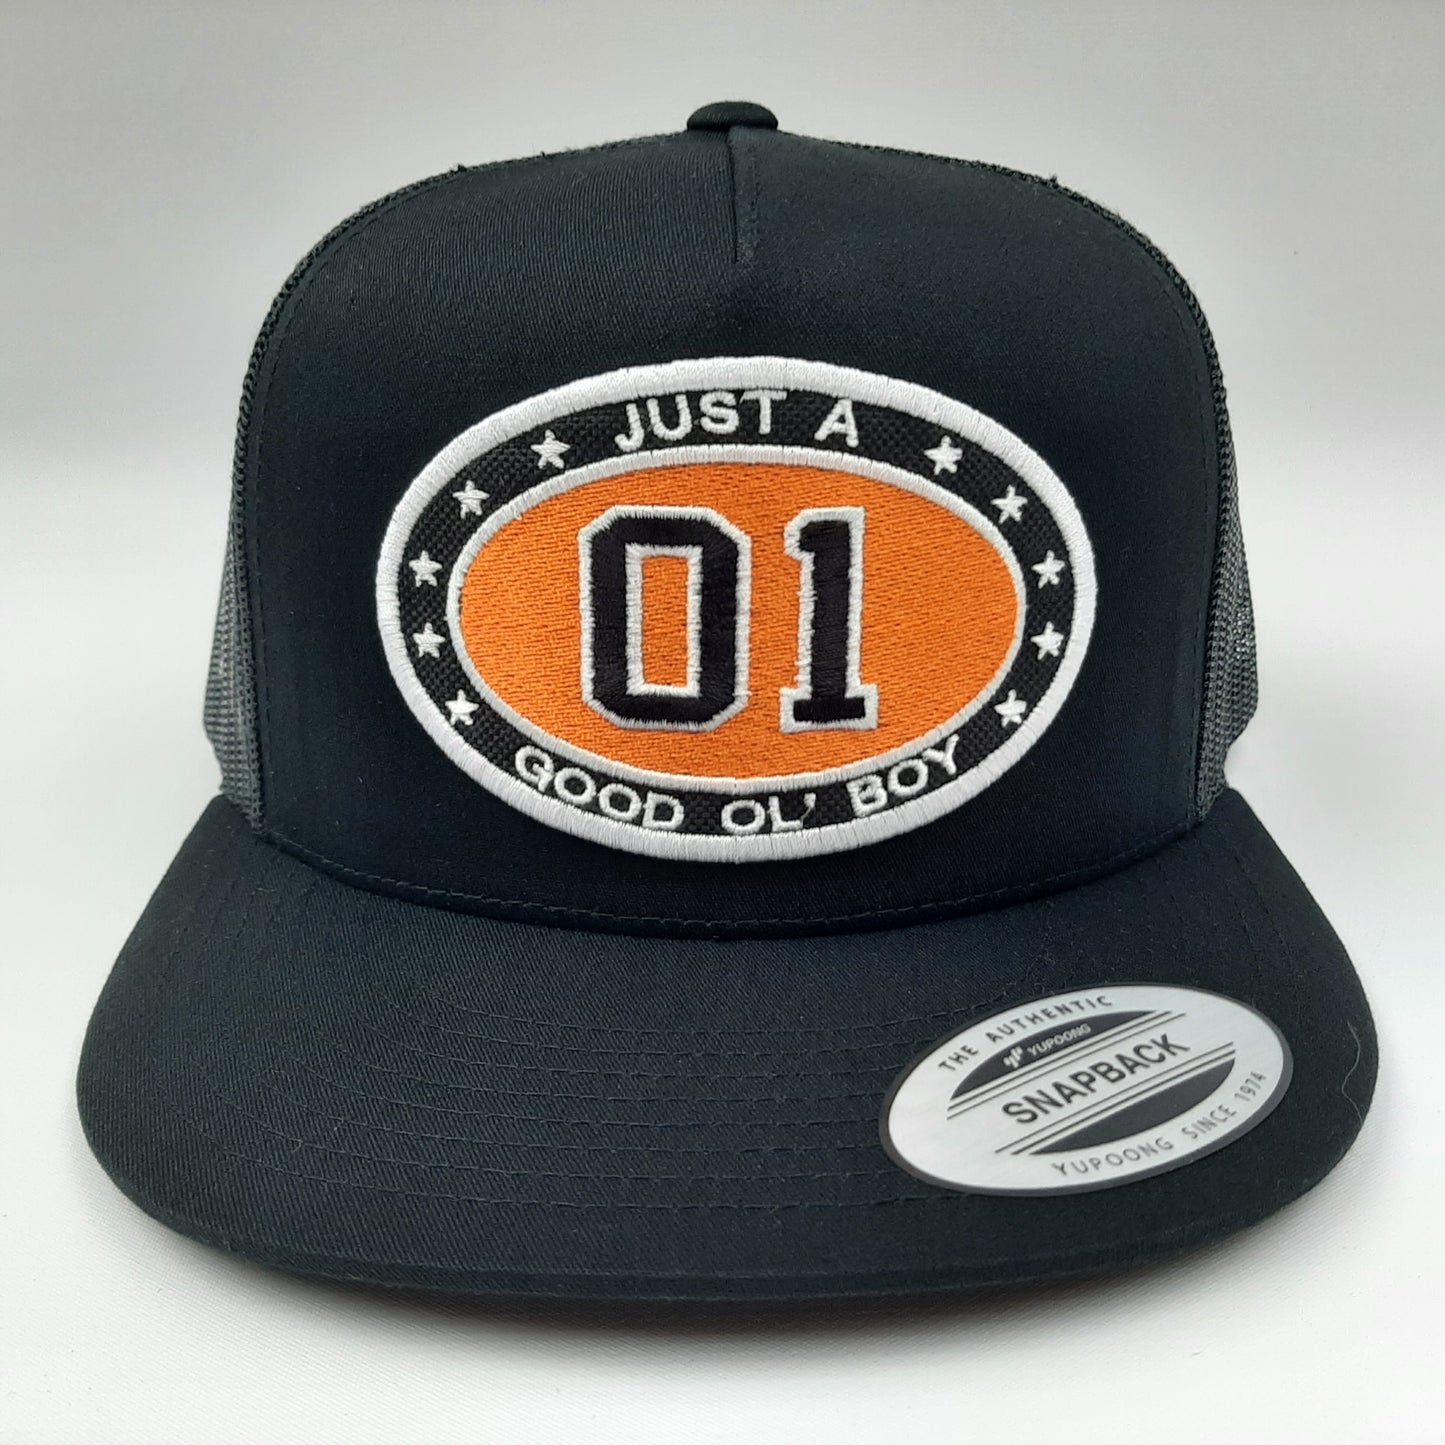 Dukes of Hazzard Gerneral Lee Embroidered patch flat bill mesh snapback cap hat black